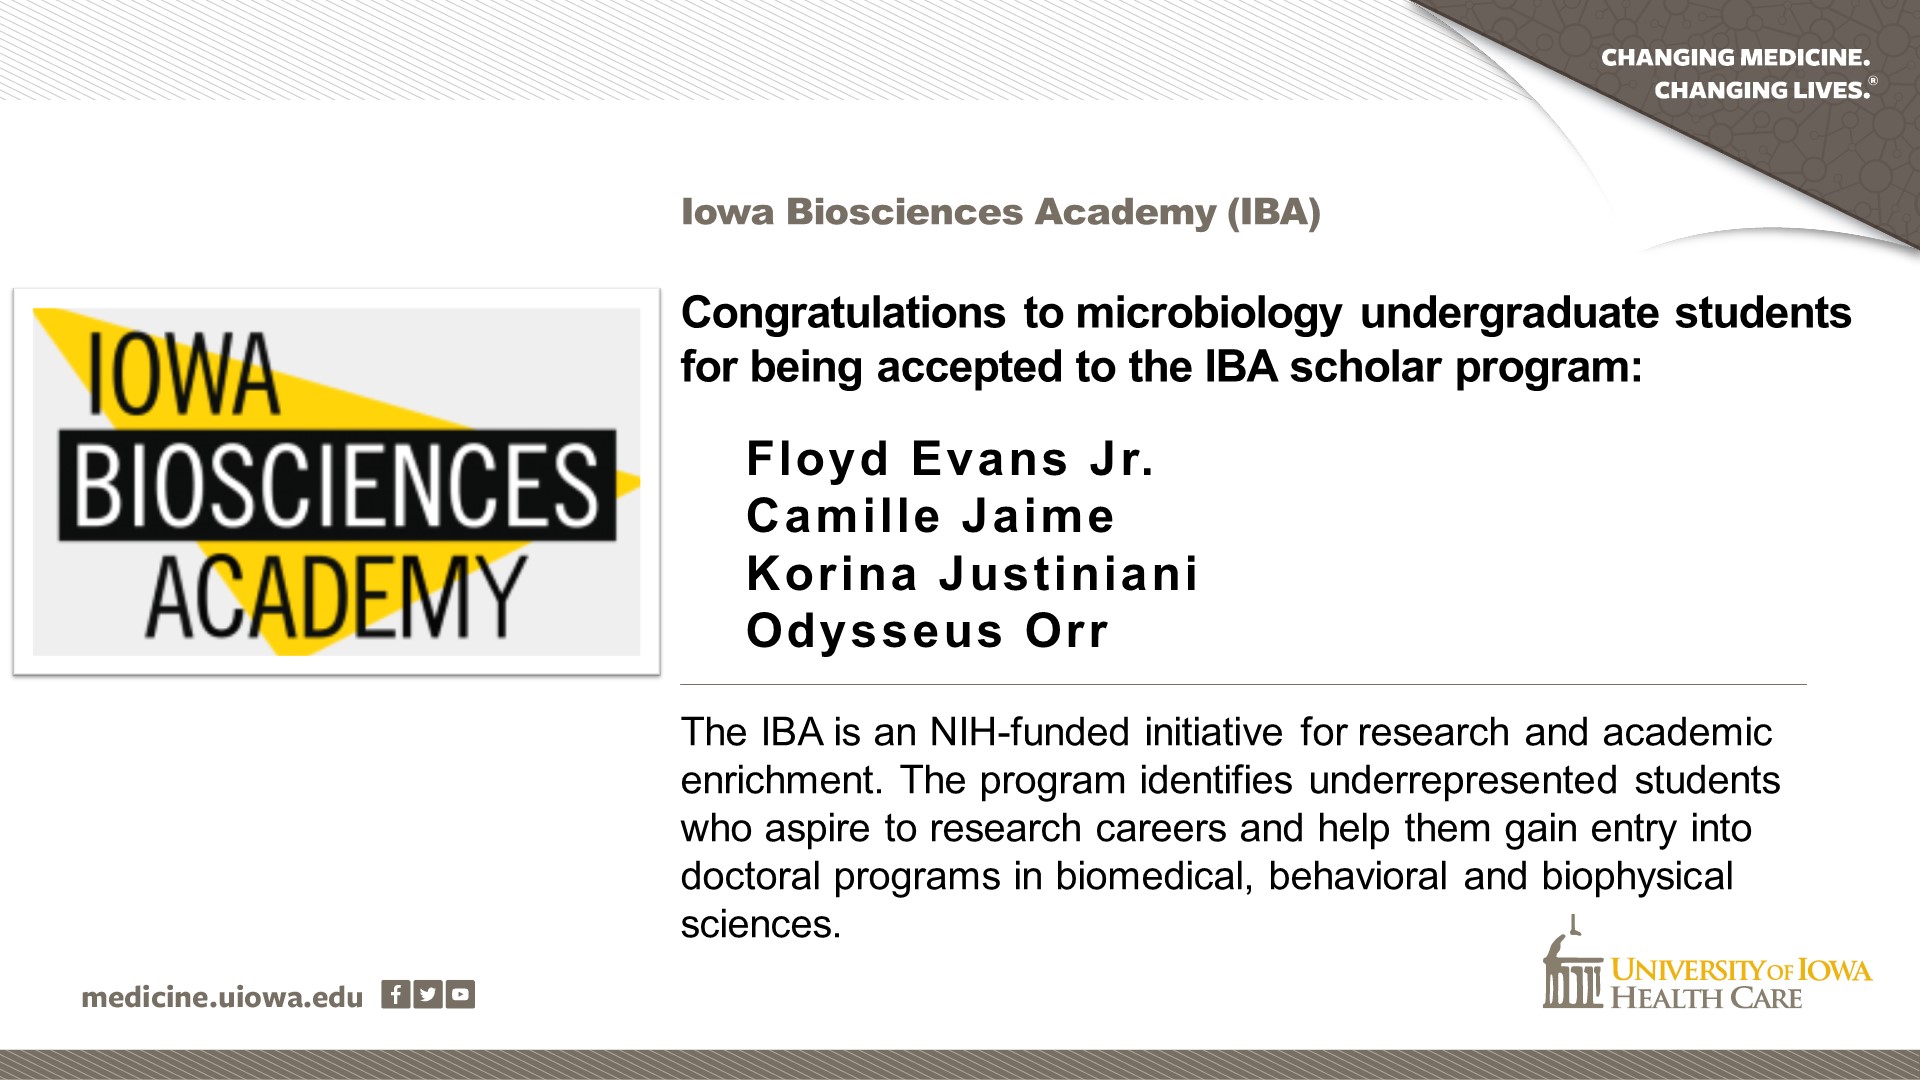 Microbiology undergraduate students being named to the IBA scholar program